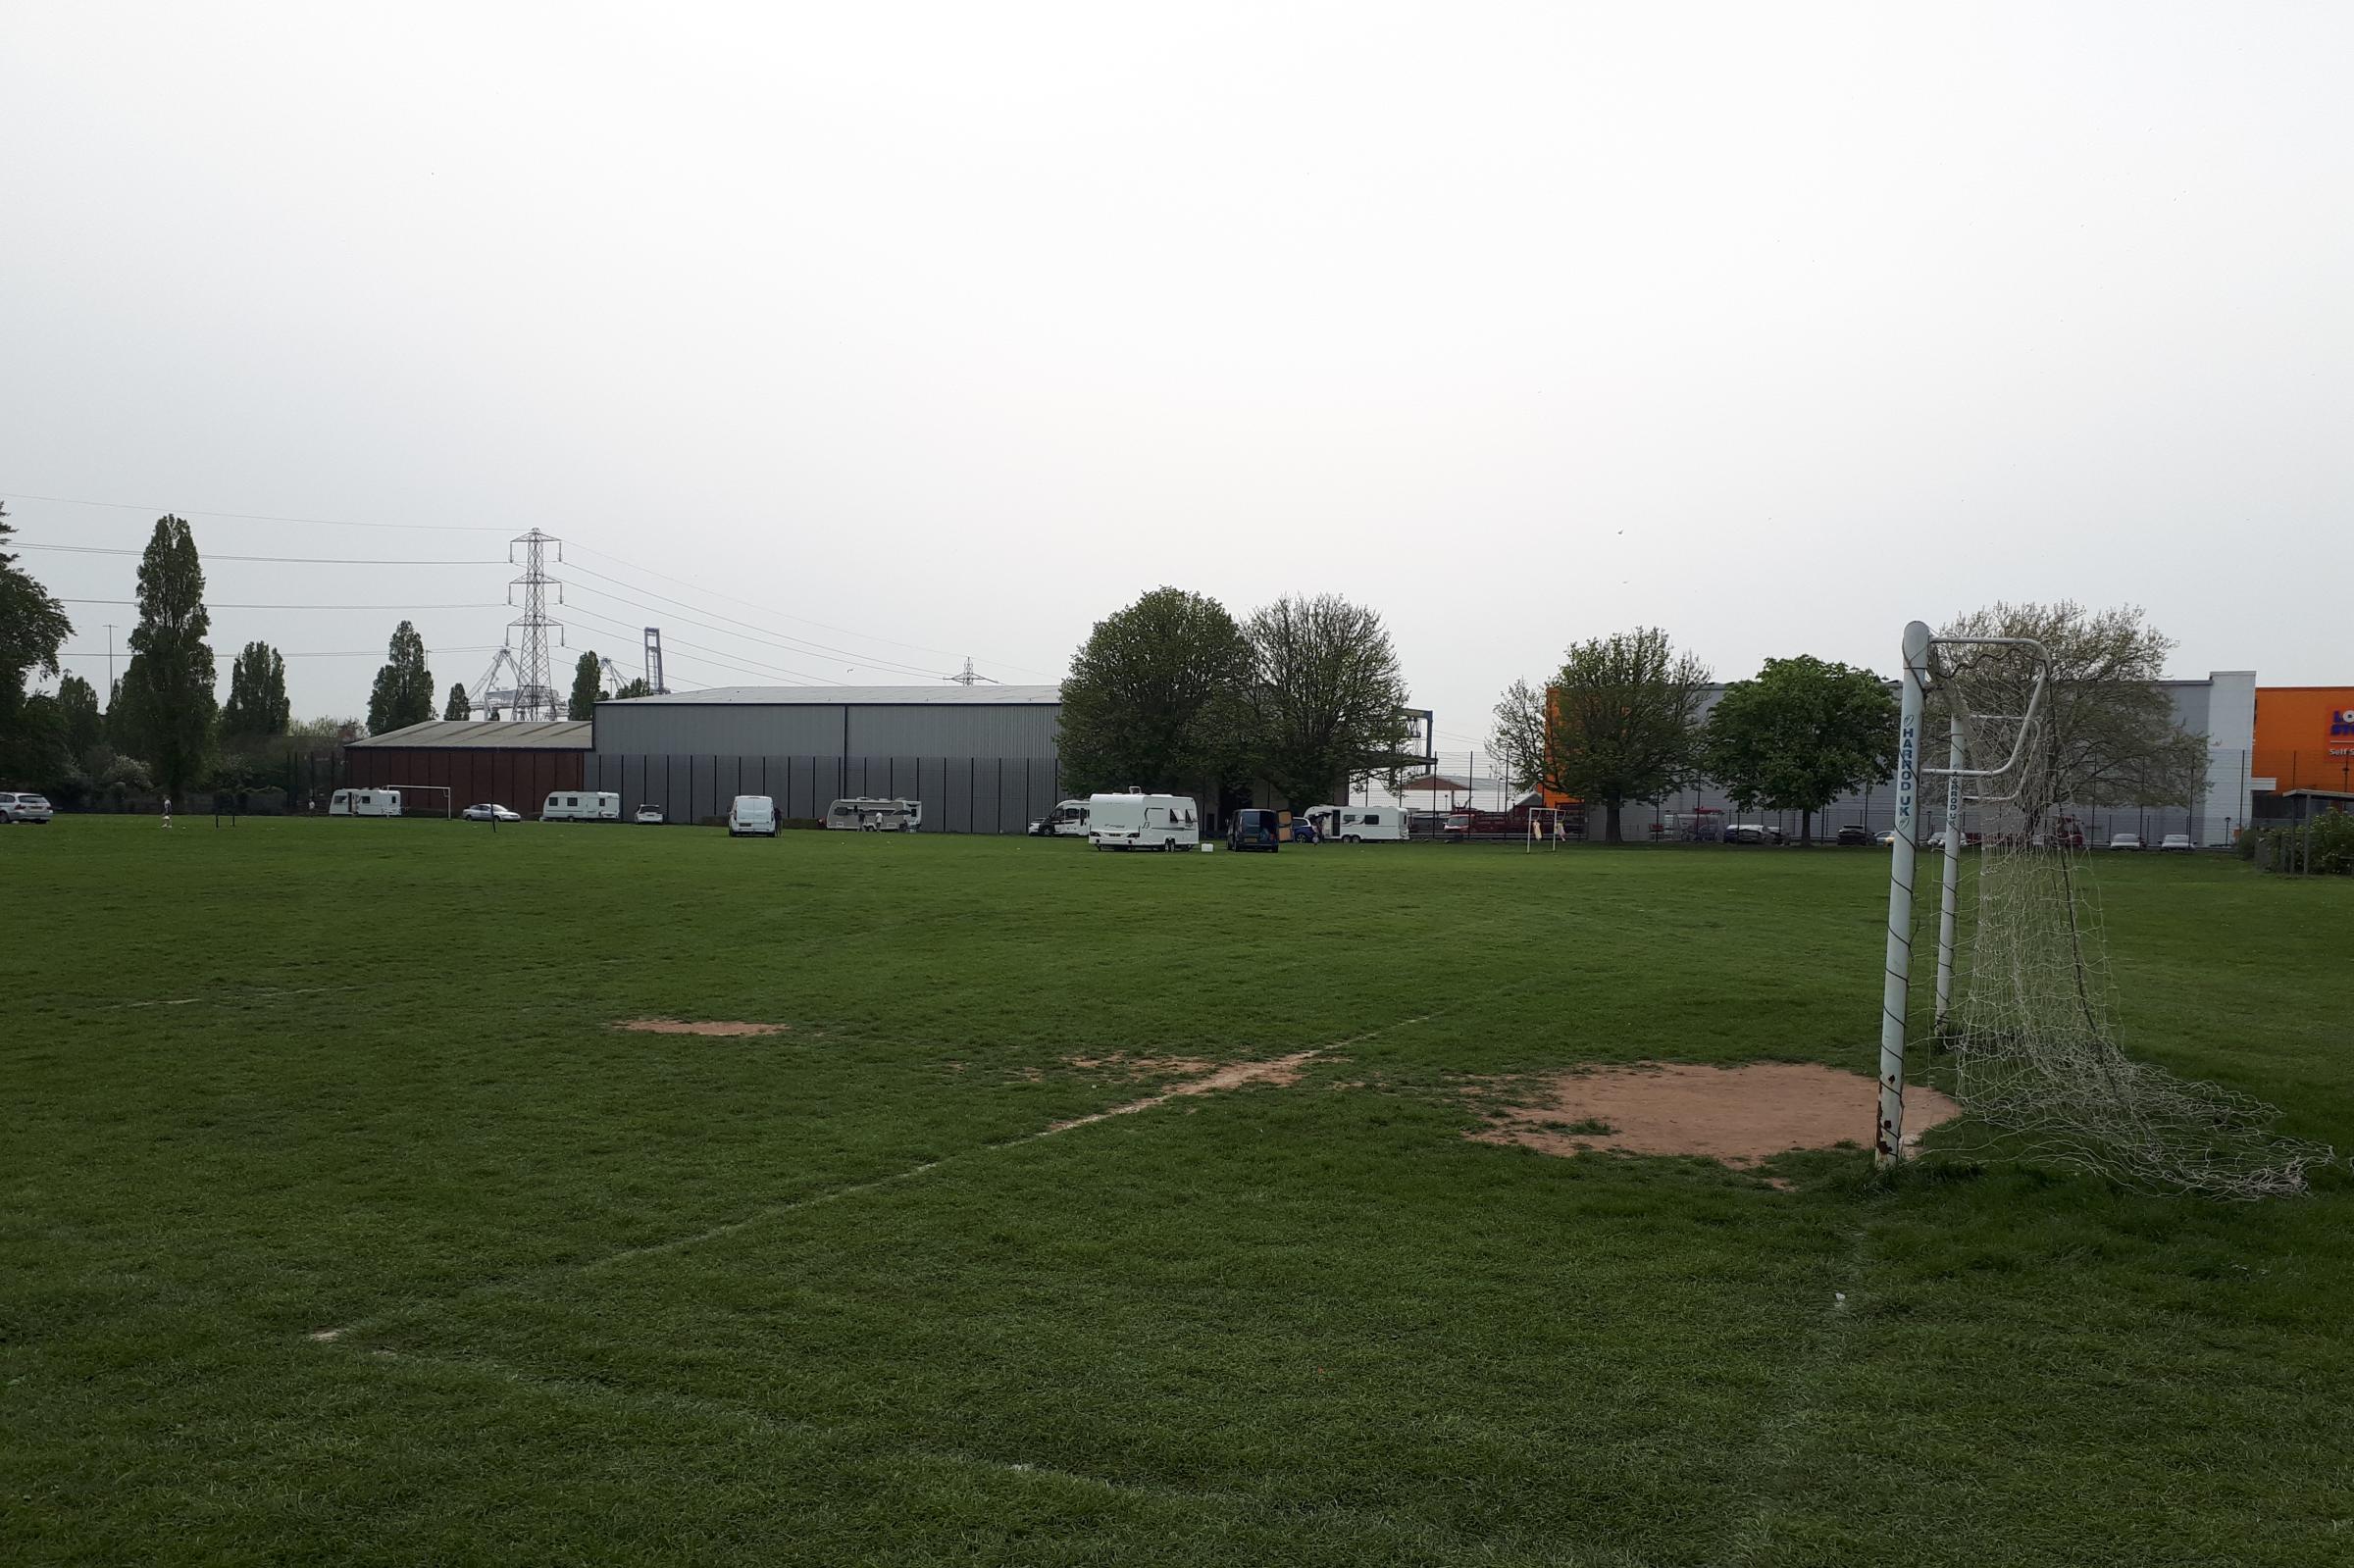 Travellers set up camp at Southampton playing field